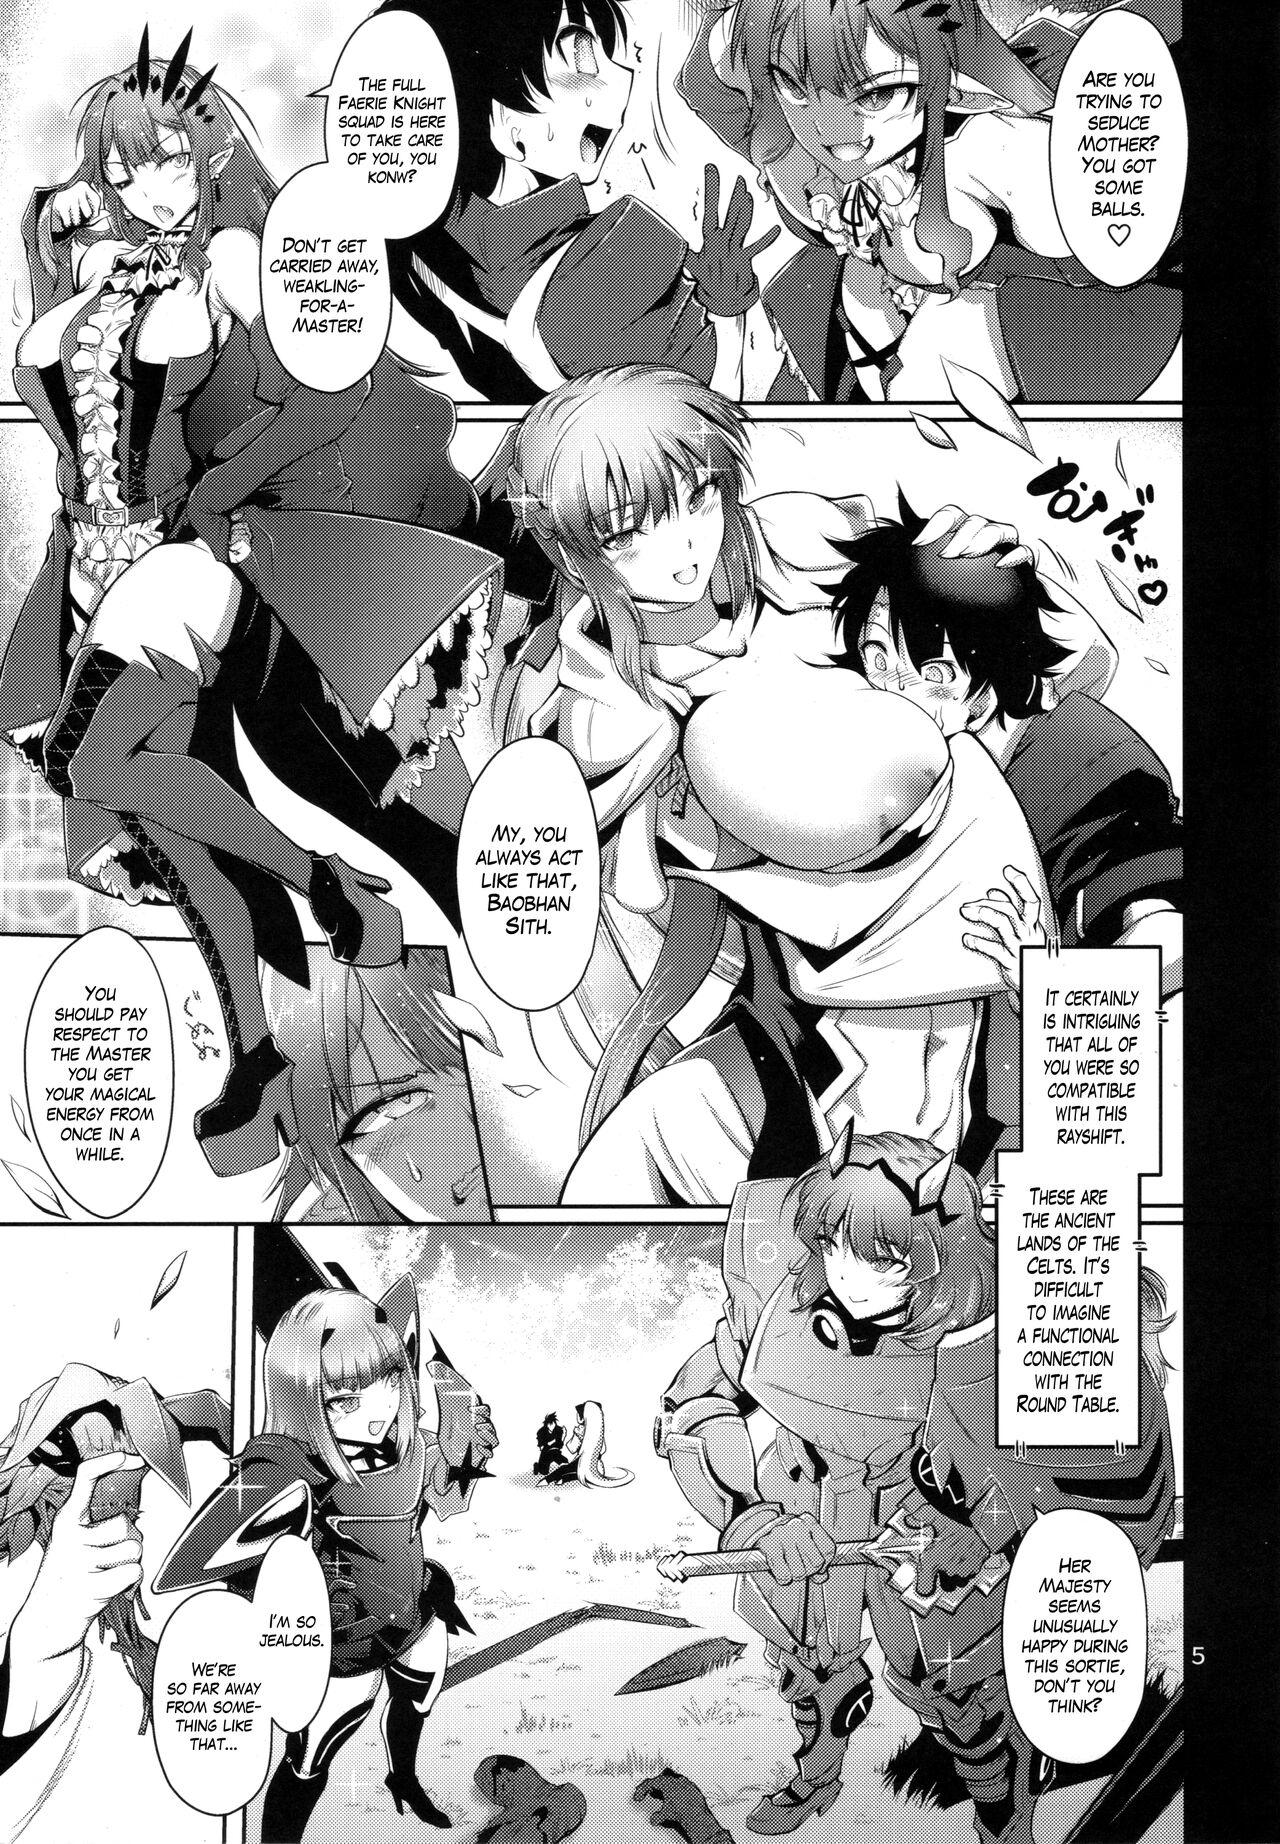 Leaked Taikan Joou | The Crowned Queen of Adultery - Fate grand order Oiled - Page 4